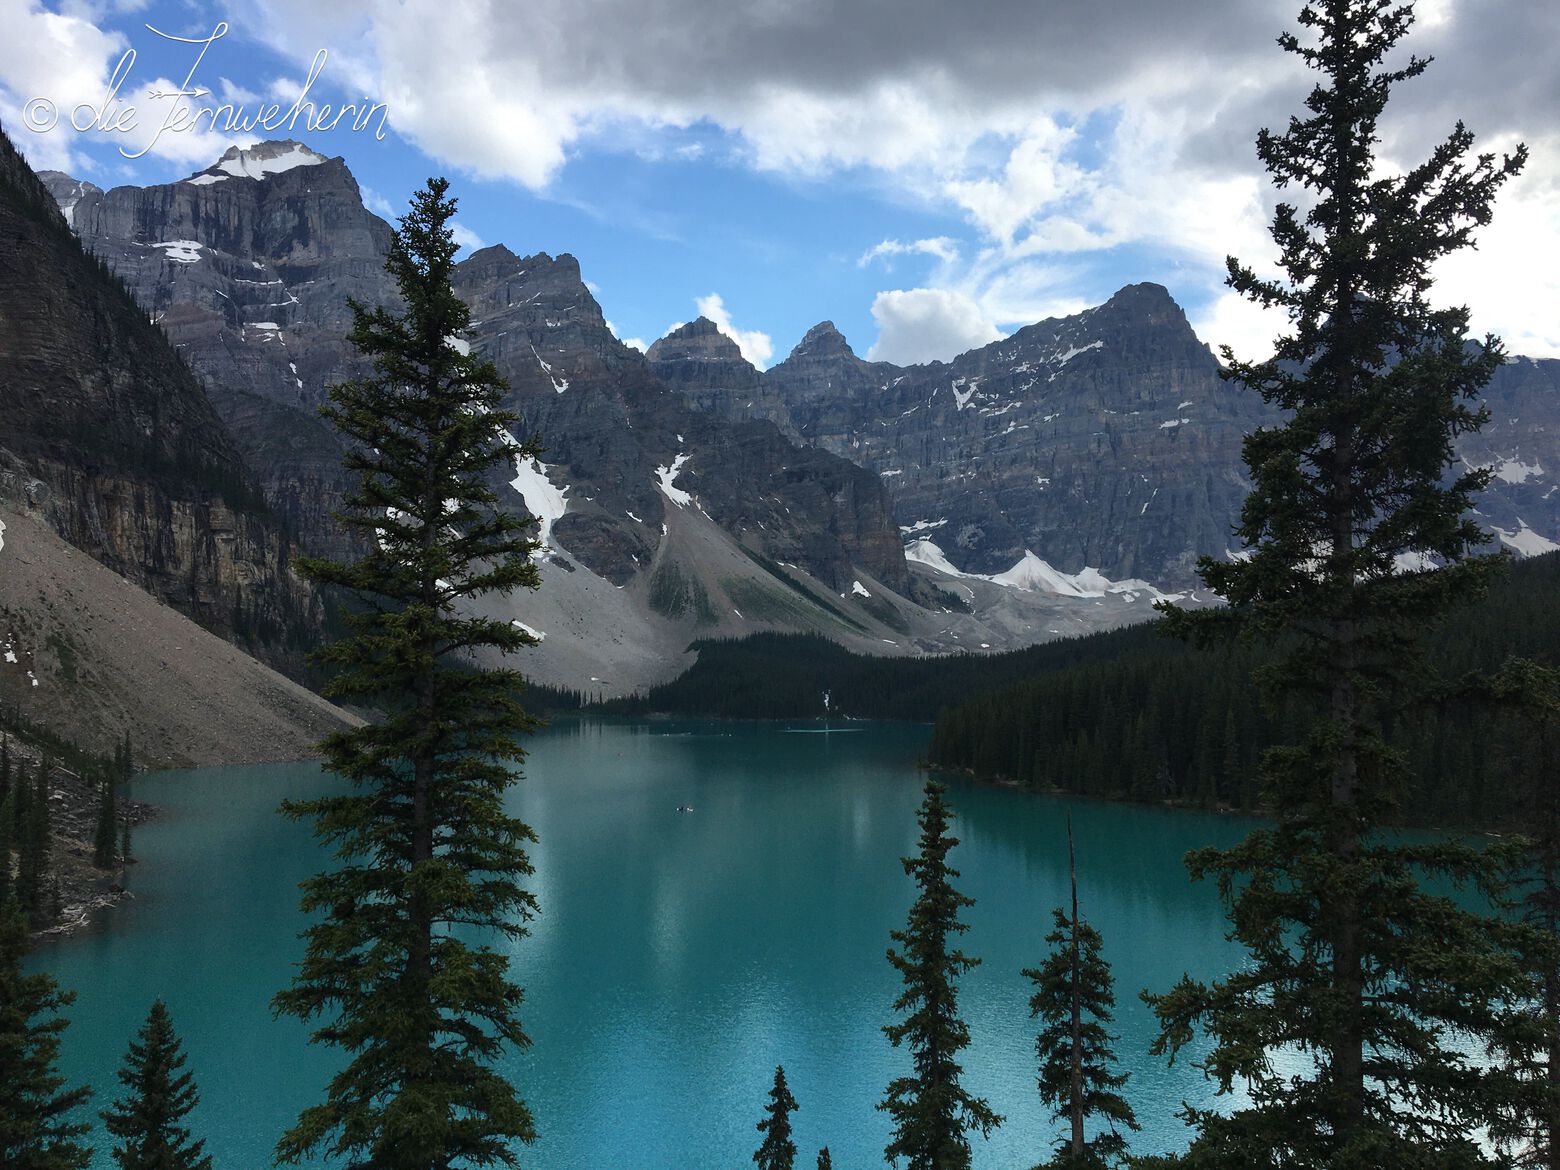 The 20-dollar view of beautiful Moraine Lake & the Ten Peaks from the Rockpile Trail in Banff National Park.